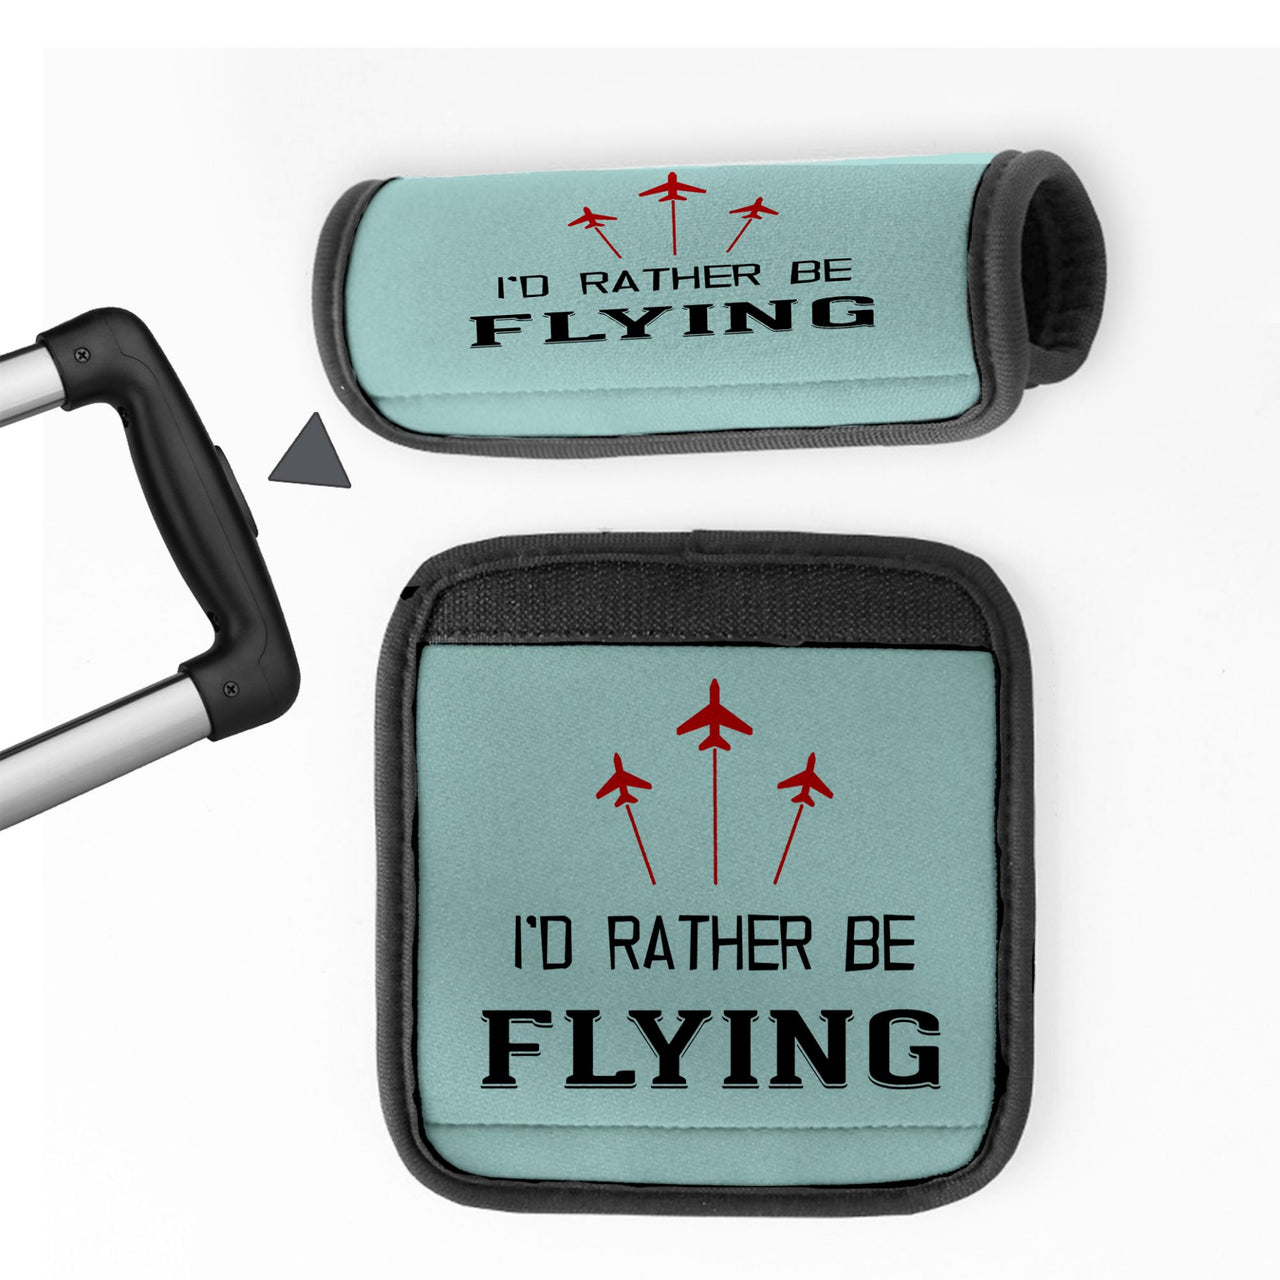 I'D Rather Be Flying Designed Neoprene Luggage Handle Covers